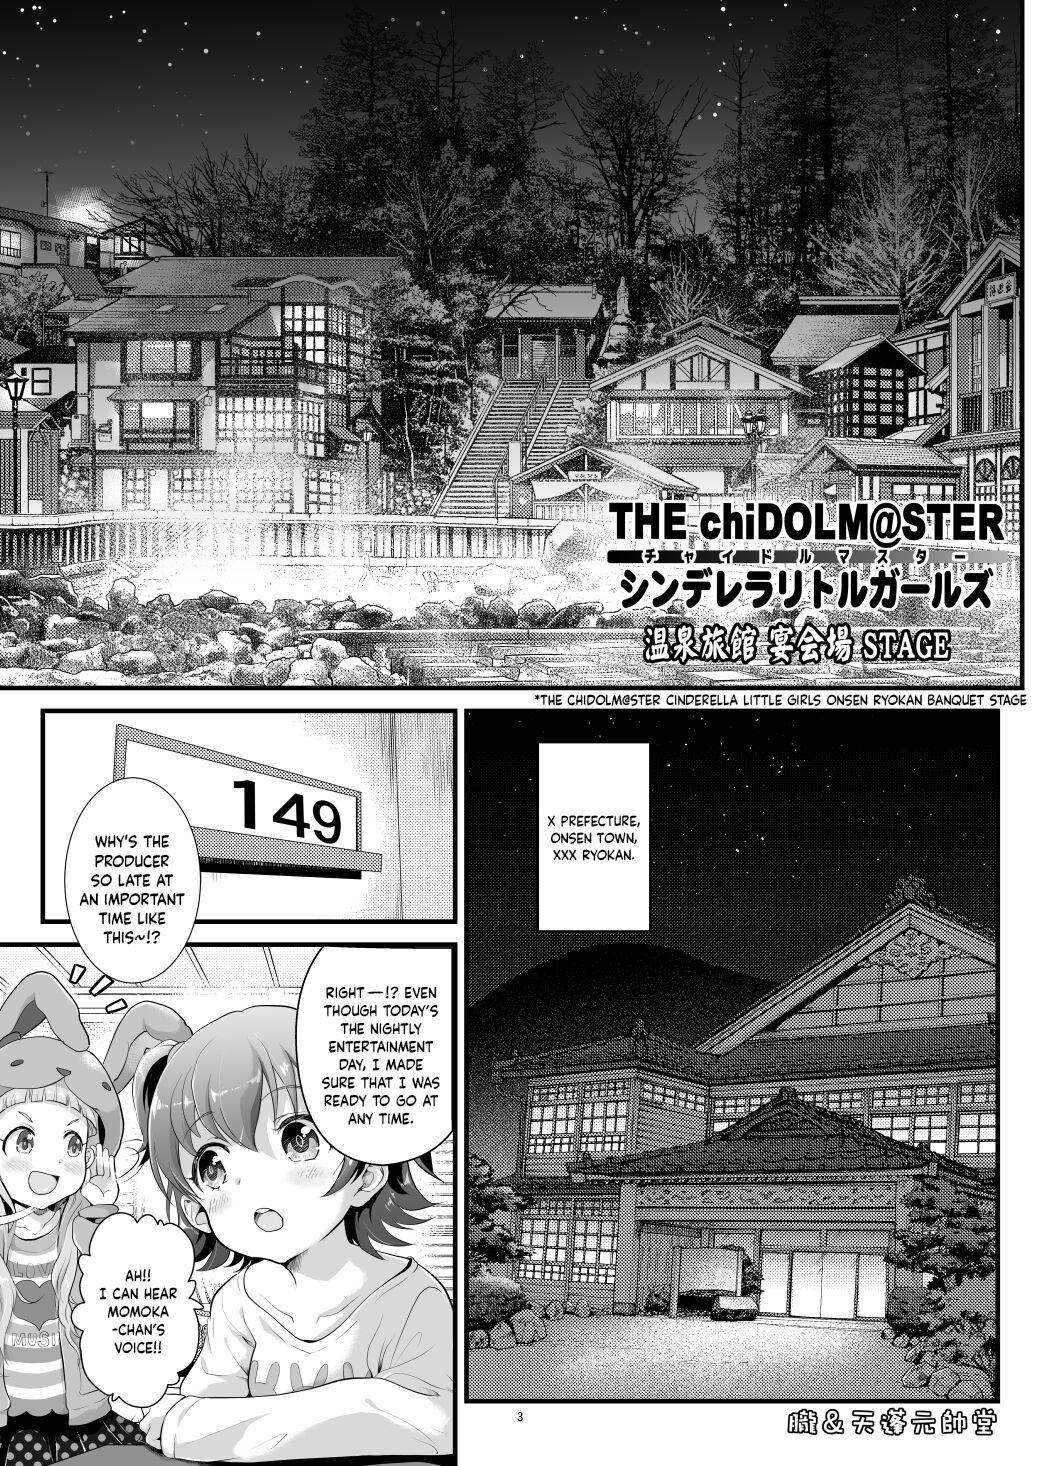 Indian THE chiDOLM@STER Cinderella Little Girls - The idolmaster Gozo - Page 2